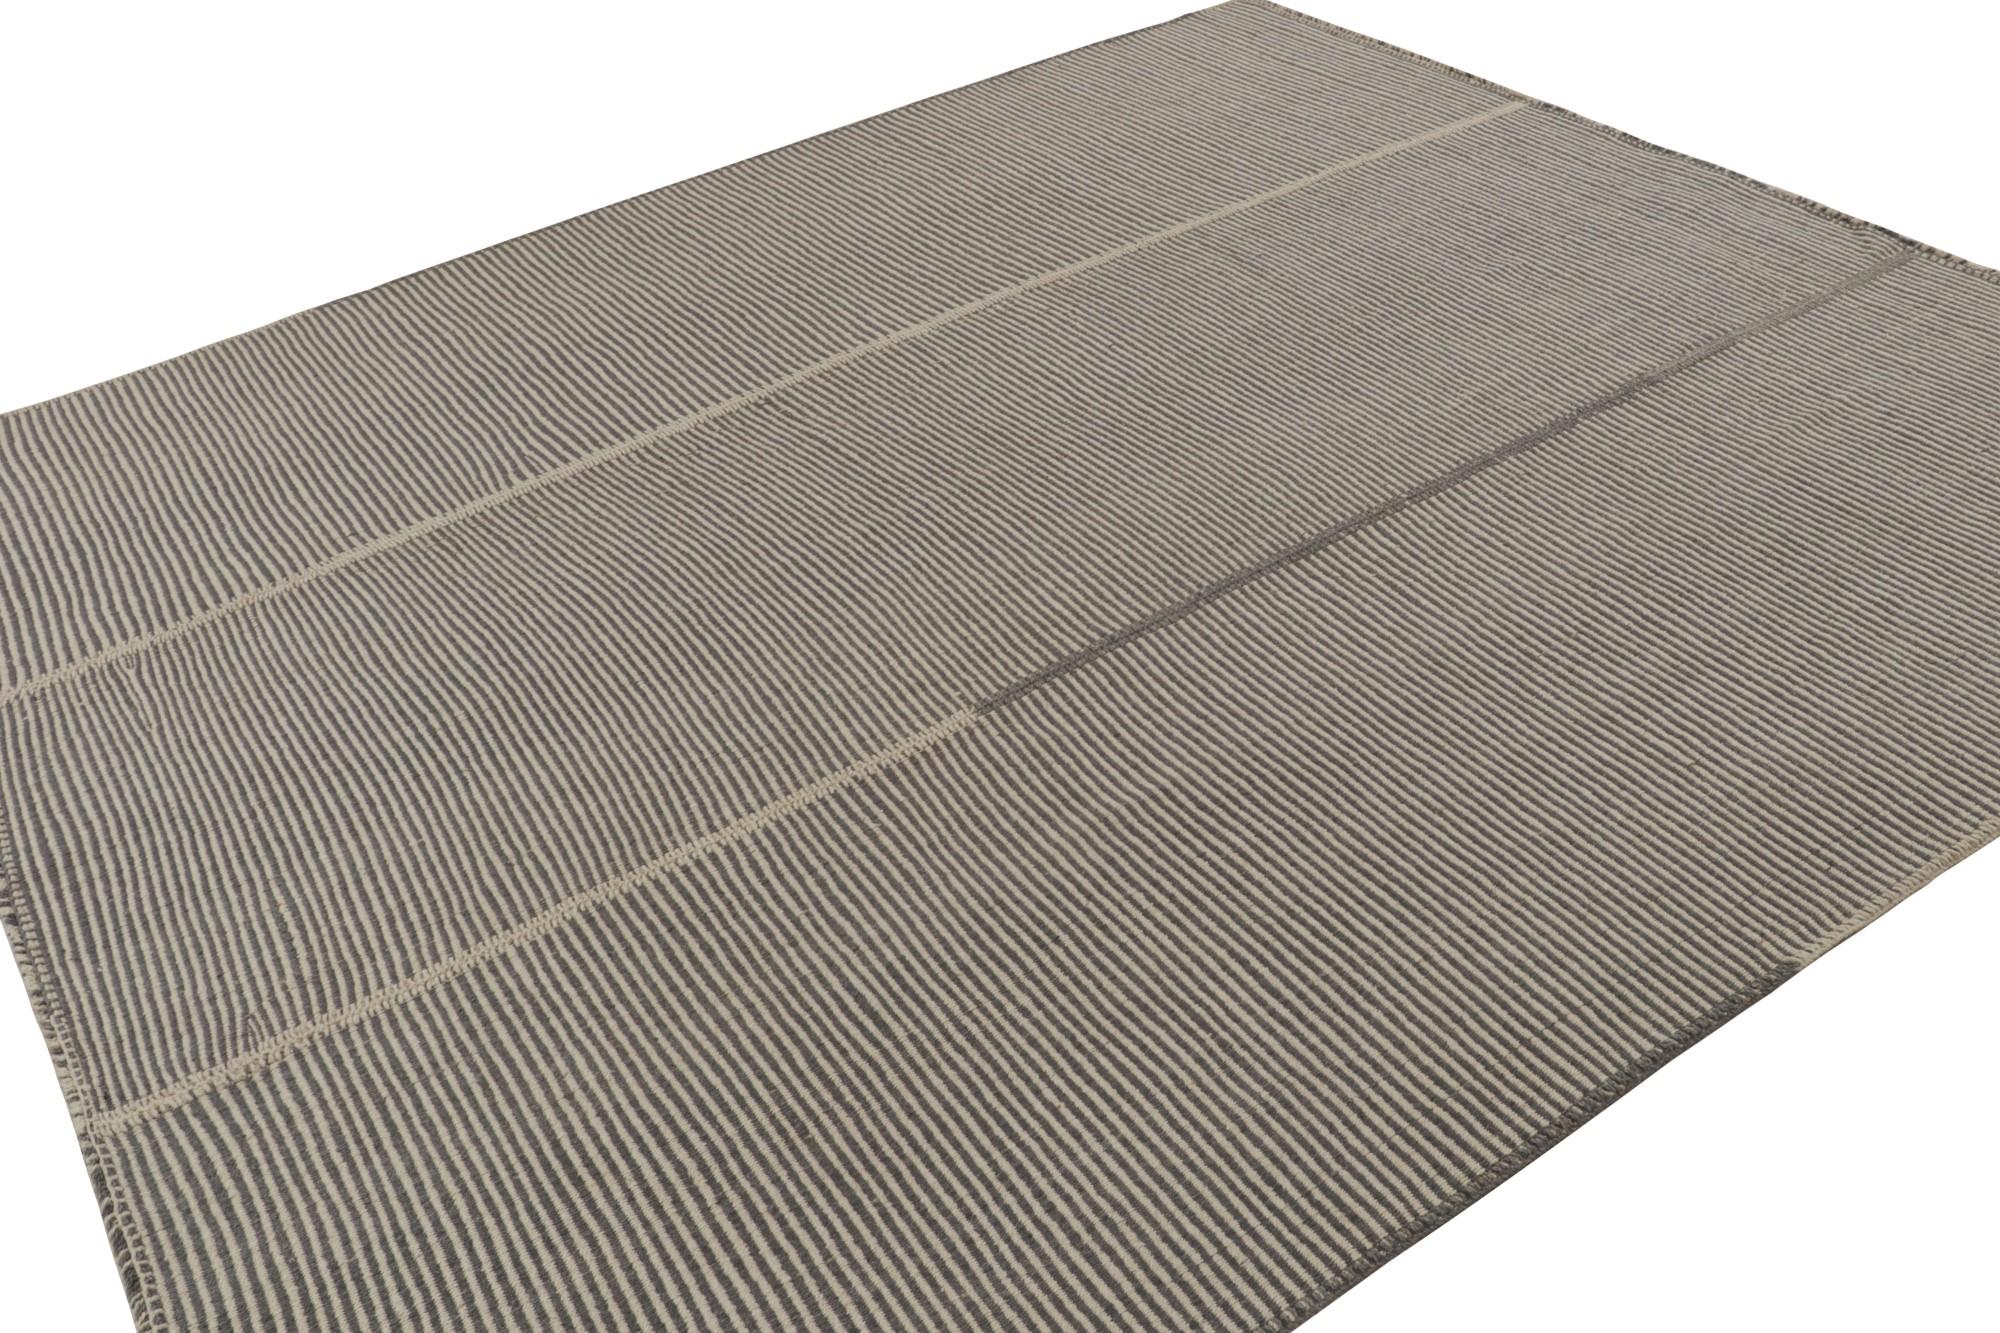 Handwoven in wool, a 9x10 Kilim in beige and gray tones, from a bold new line of contemporary flatweaves, ‘Rez Kilim’, by Rug & Kilim.

On the design: 

Connoting a modern take on classic panel-weaving, our latest “Rez Kilim” enjoys beige, brown and